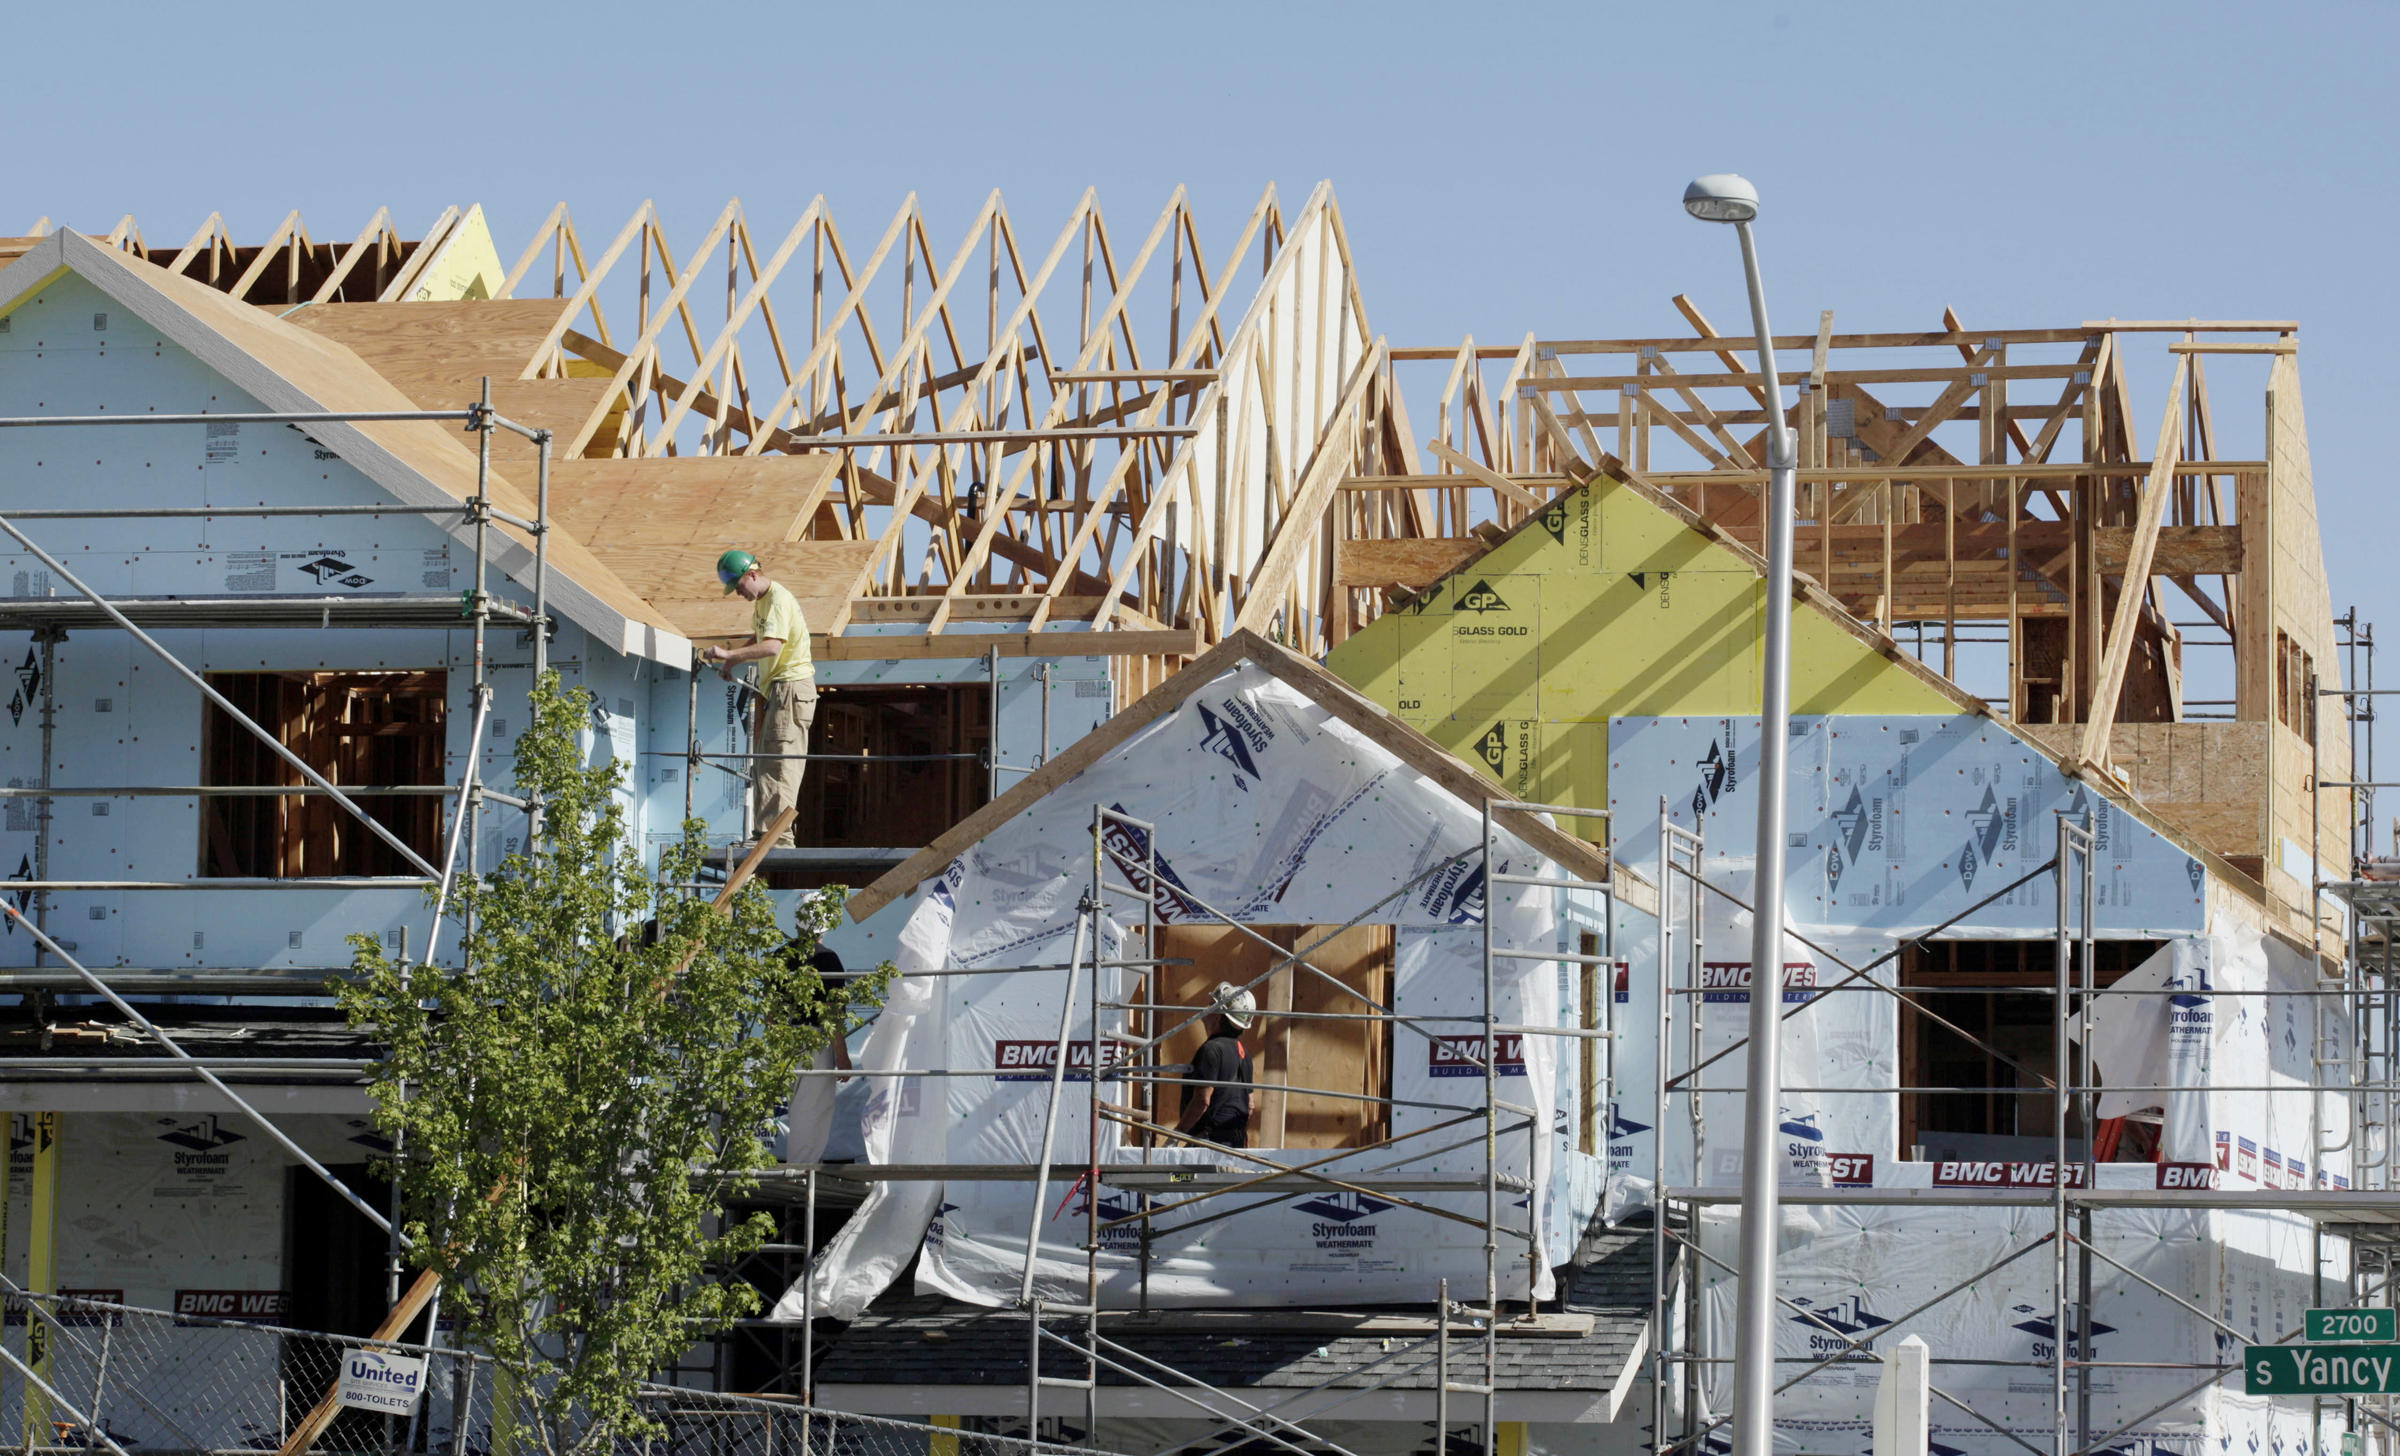 File photo. Seattle's rental housing market shows more availability than other areas of Washington, like Kittitas and Yakima counties, where new construction hasn't kept up with demand. CREDIT: TED S. WARREN/AP